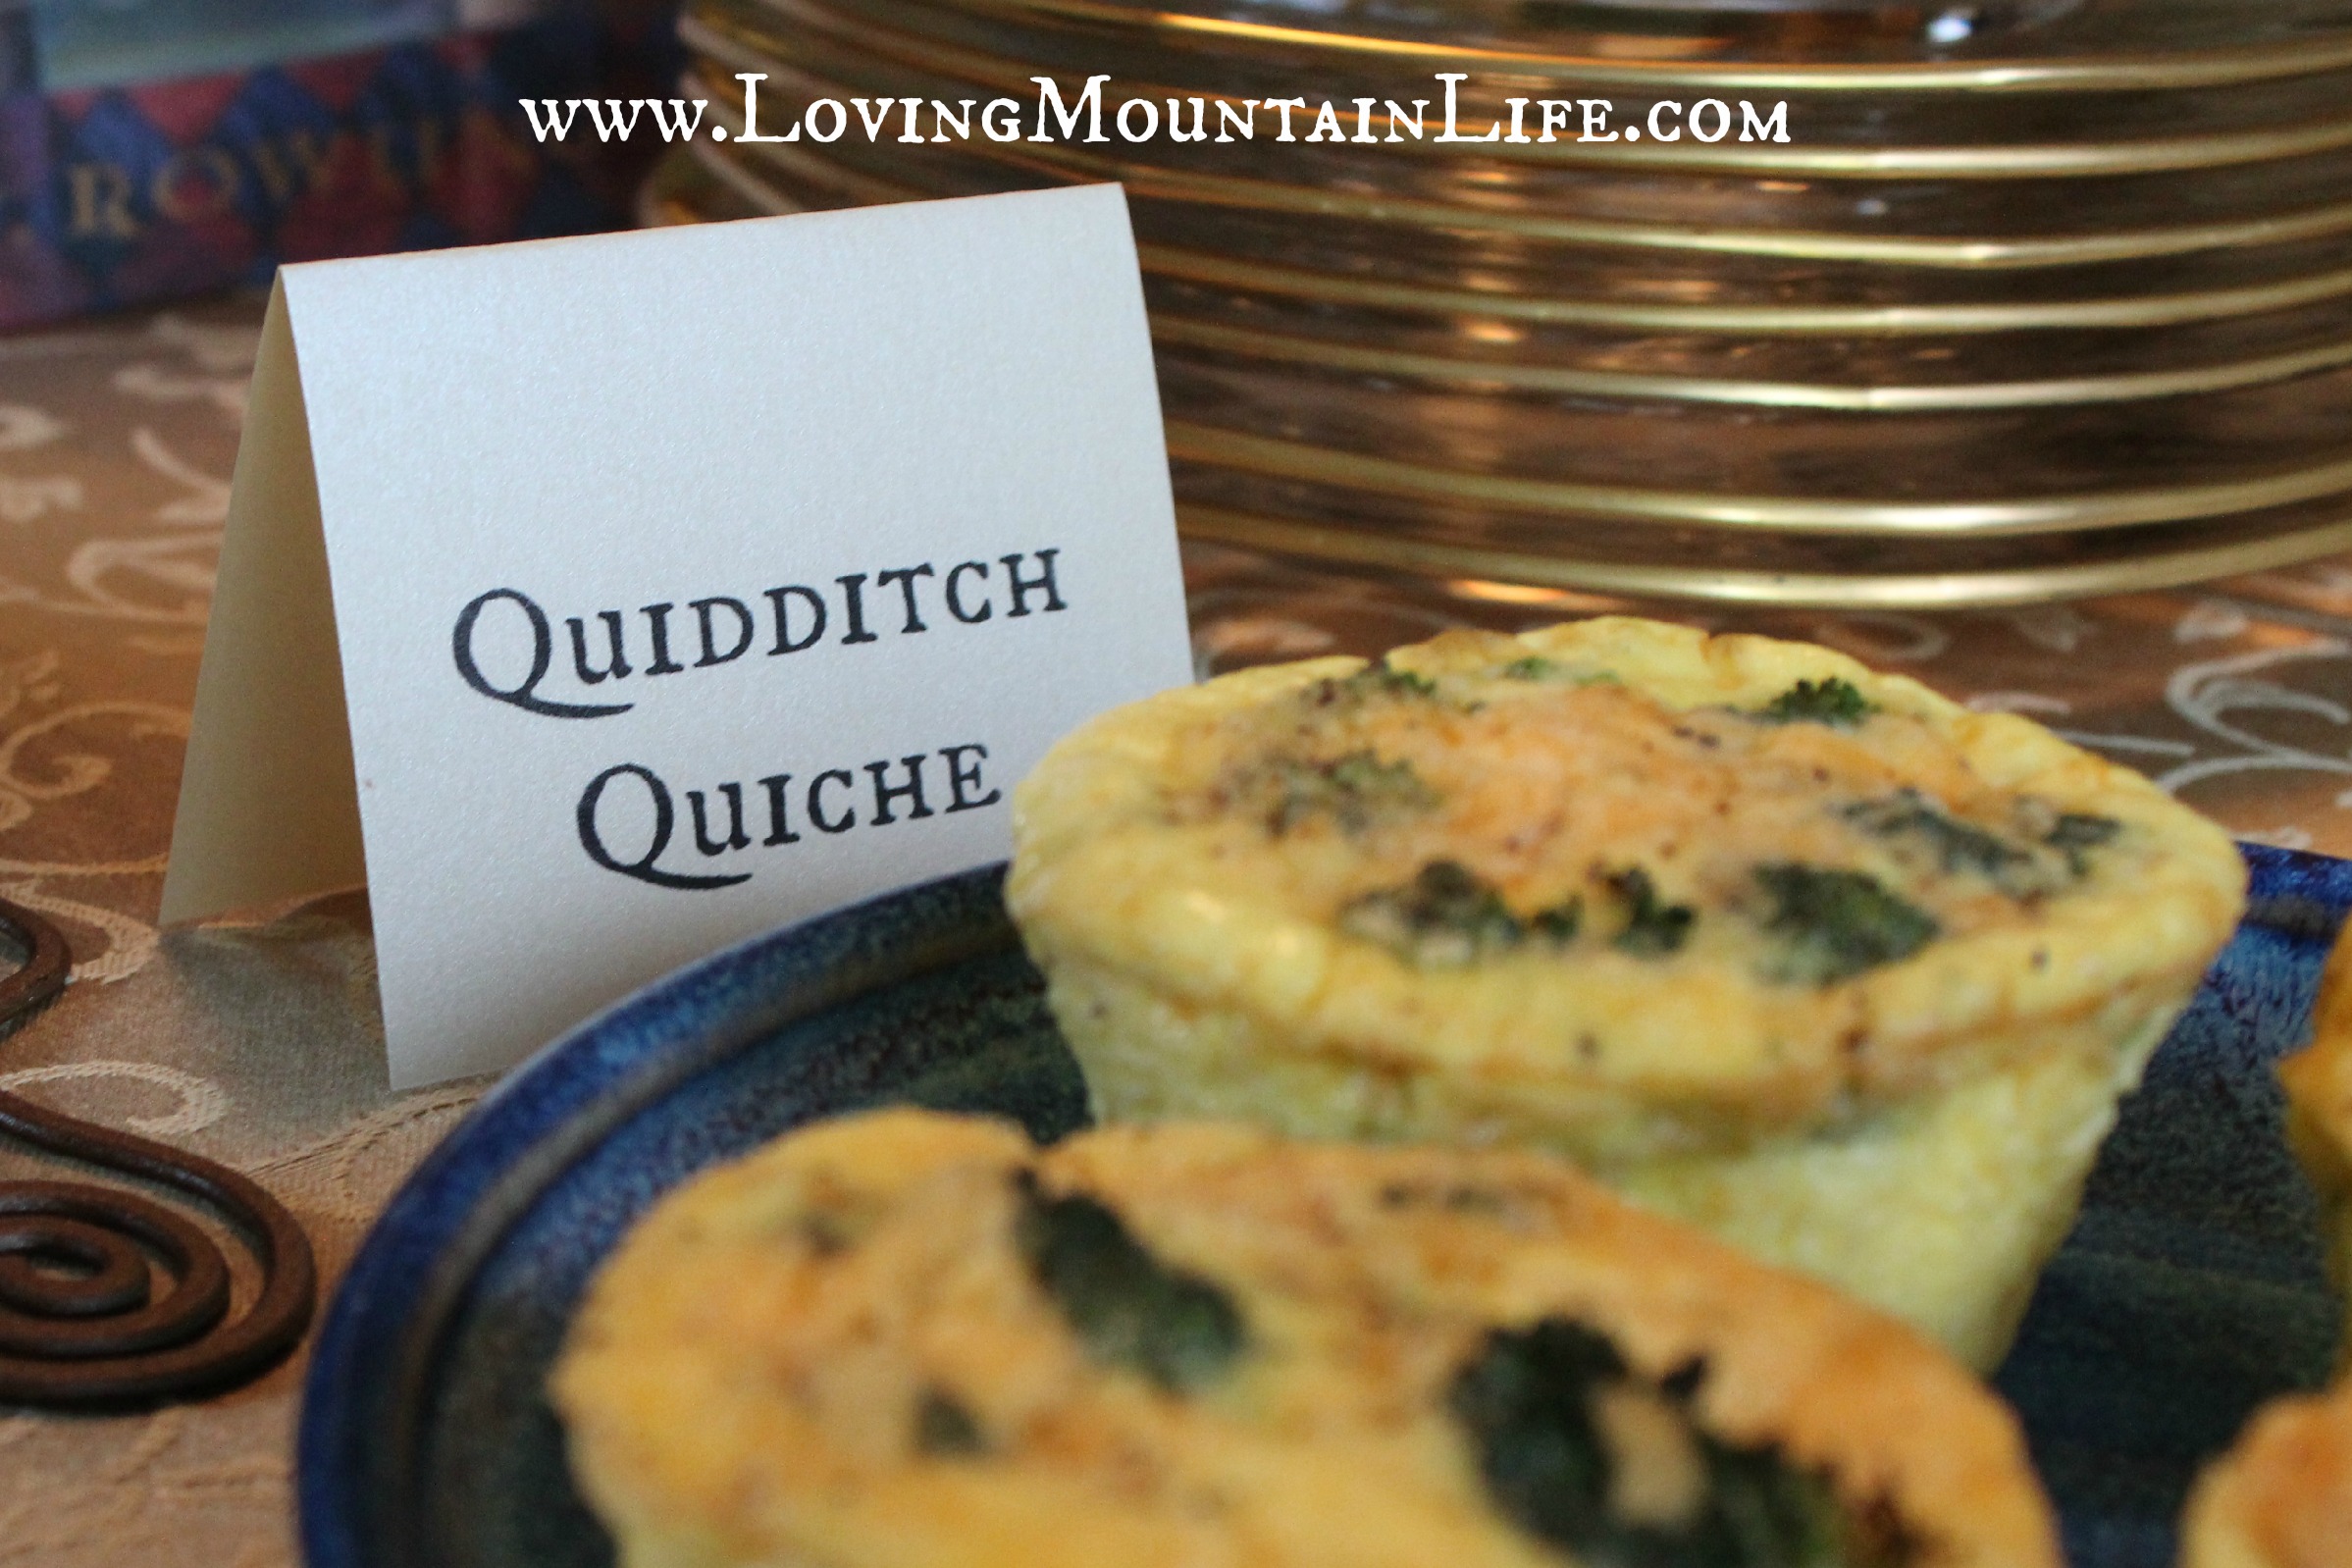 Quidditch Quiche for a Harry Potter party